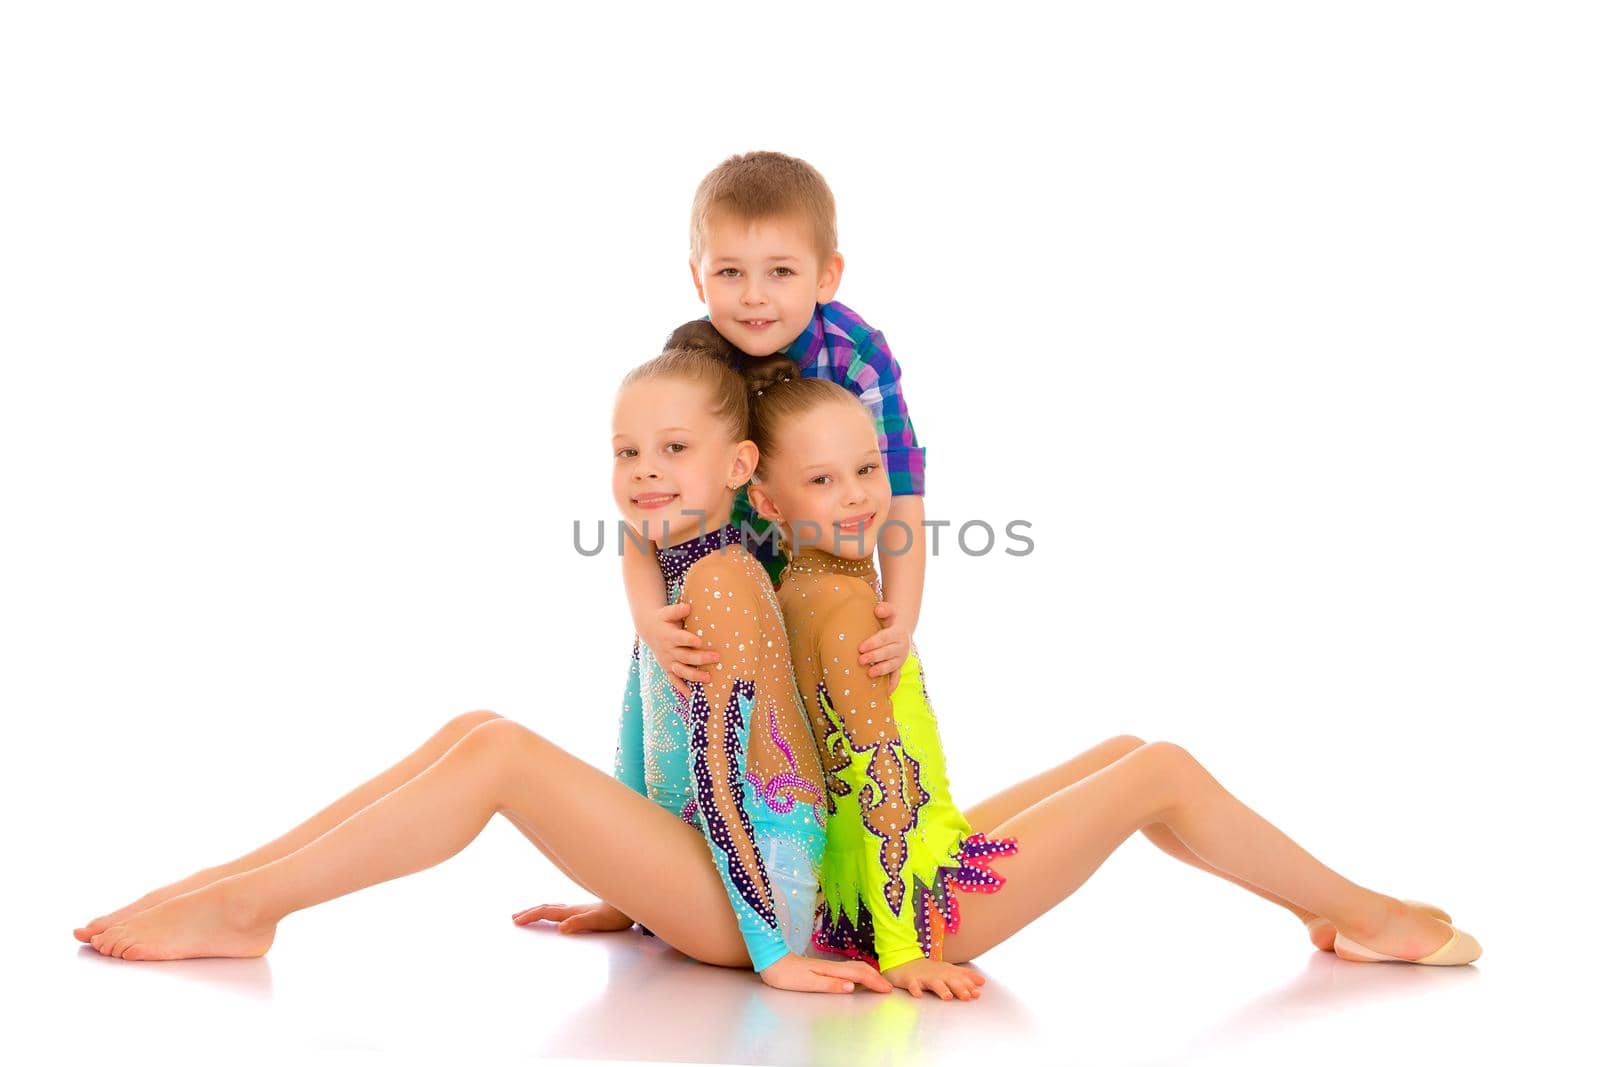 Cheerful girls, and the little boy their brother together embrac by kolesnikov_studio